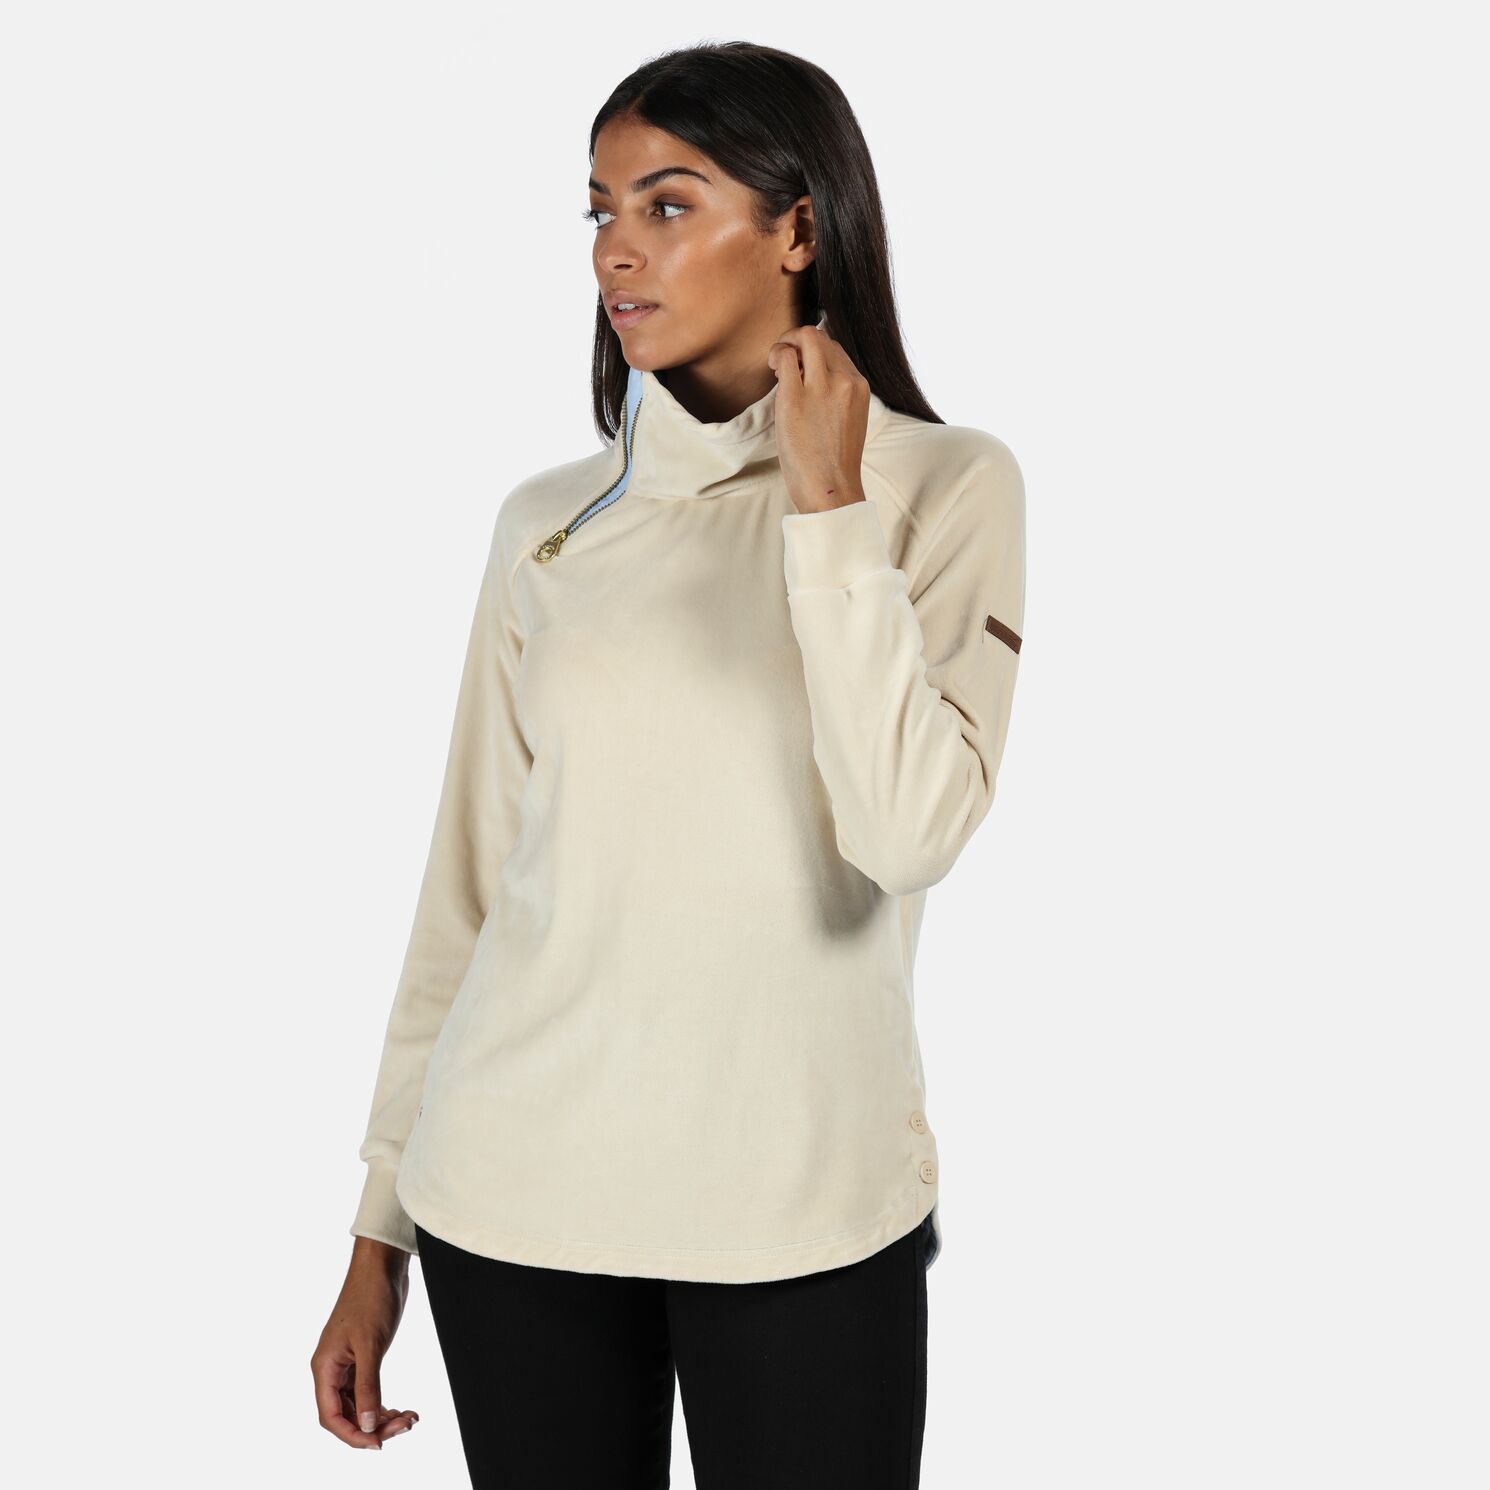 Material: 94% polyester, 6% elastane. Velour fabric. Asymmetric zip fastening. Side vents at hem detail with branded buttons. Shaped hem. Bust sizes to fit: (6): 76cm, (8): 81cm, (10): 86cm, (12): 92cm, (14): 97cm, (16): 102cm, (18): 107cm, (20): 112cm, (22): 117cm, (24): 122cm, (26): 127cm, (28): 132cm, (30): 137cm.